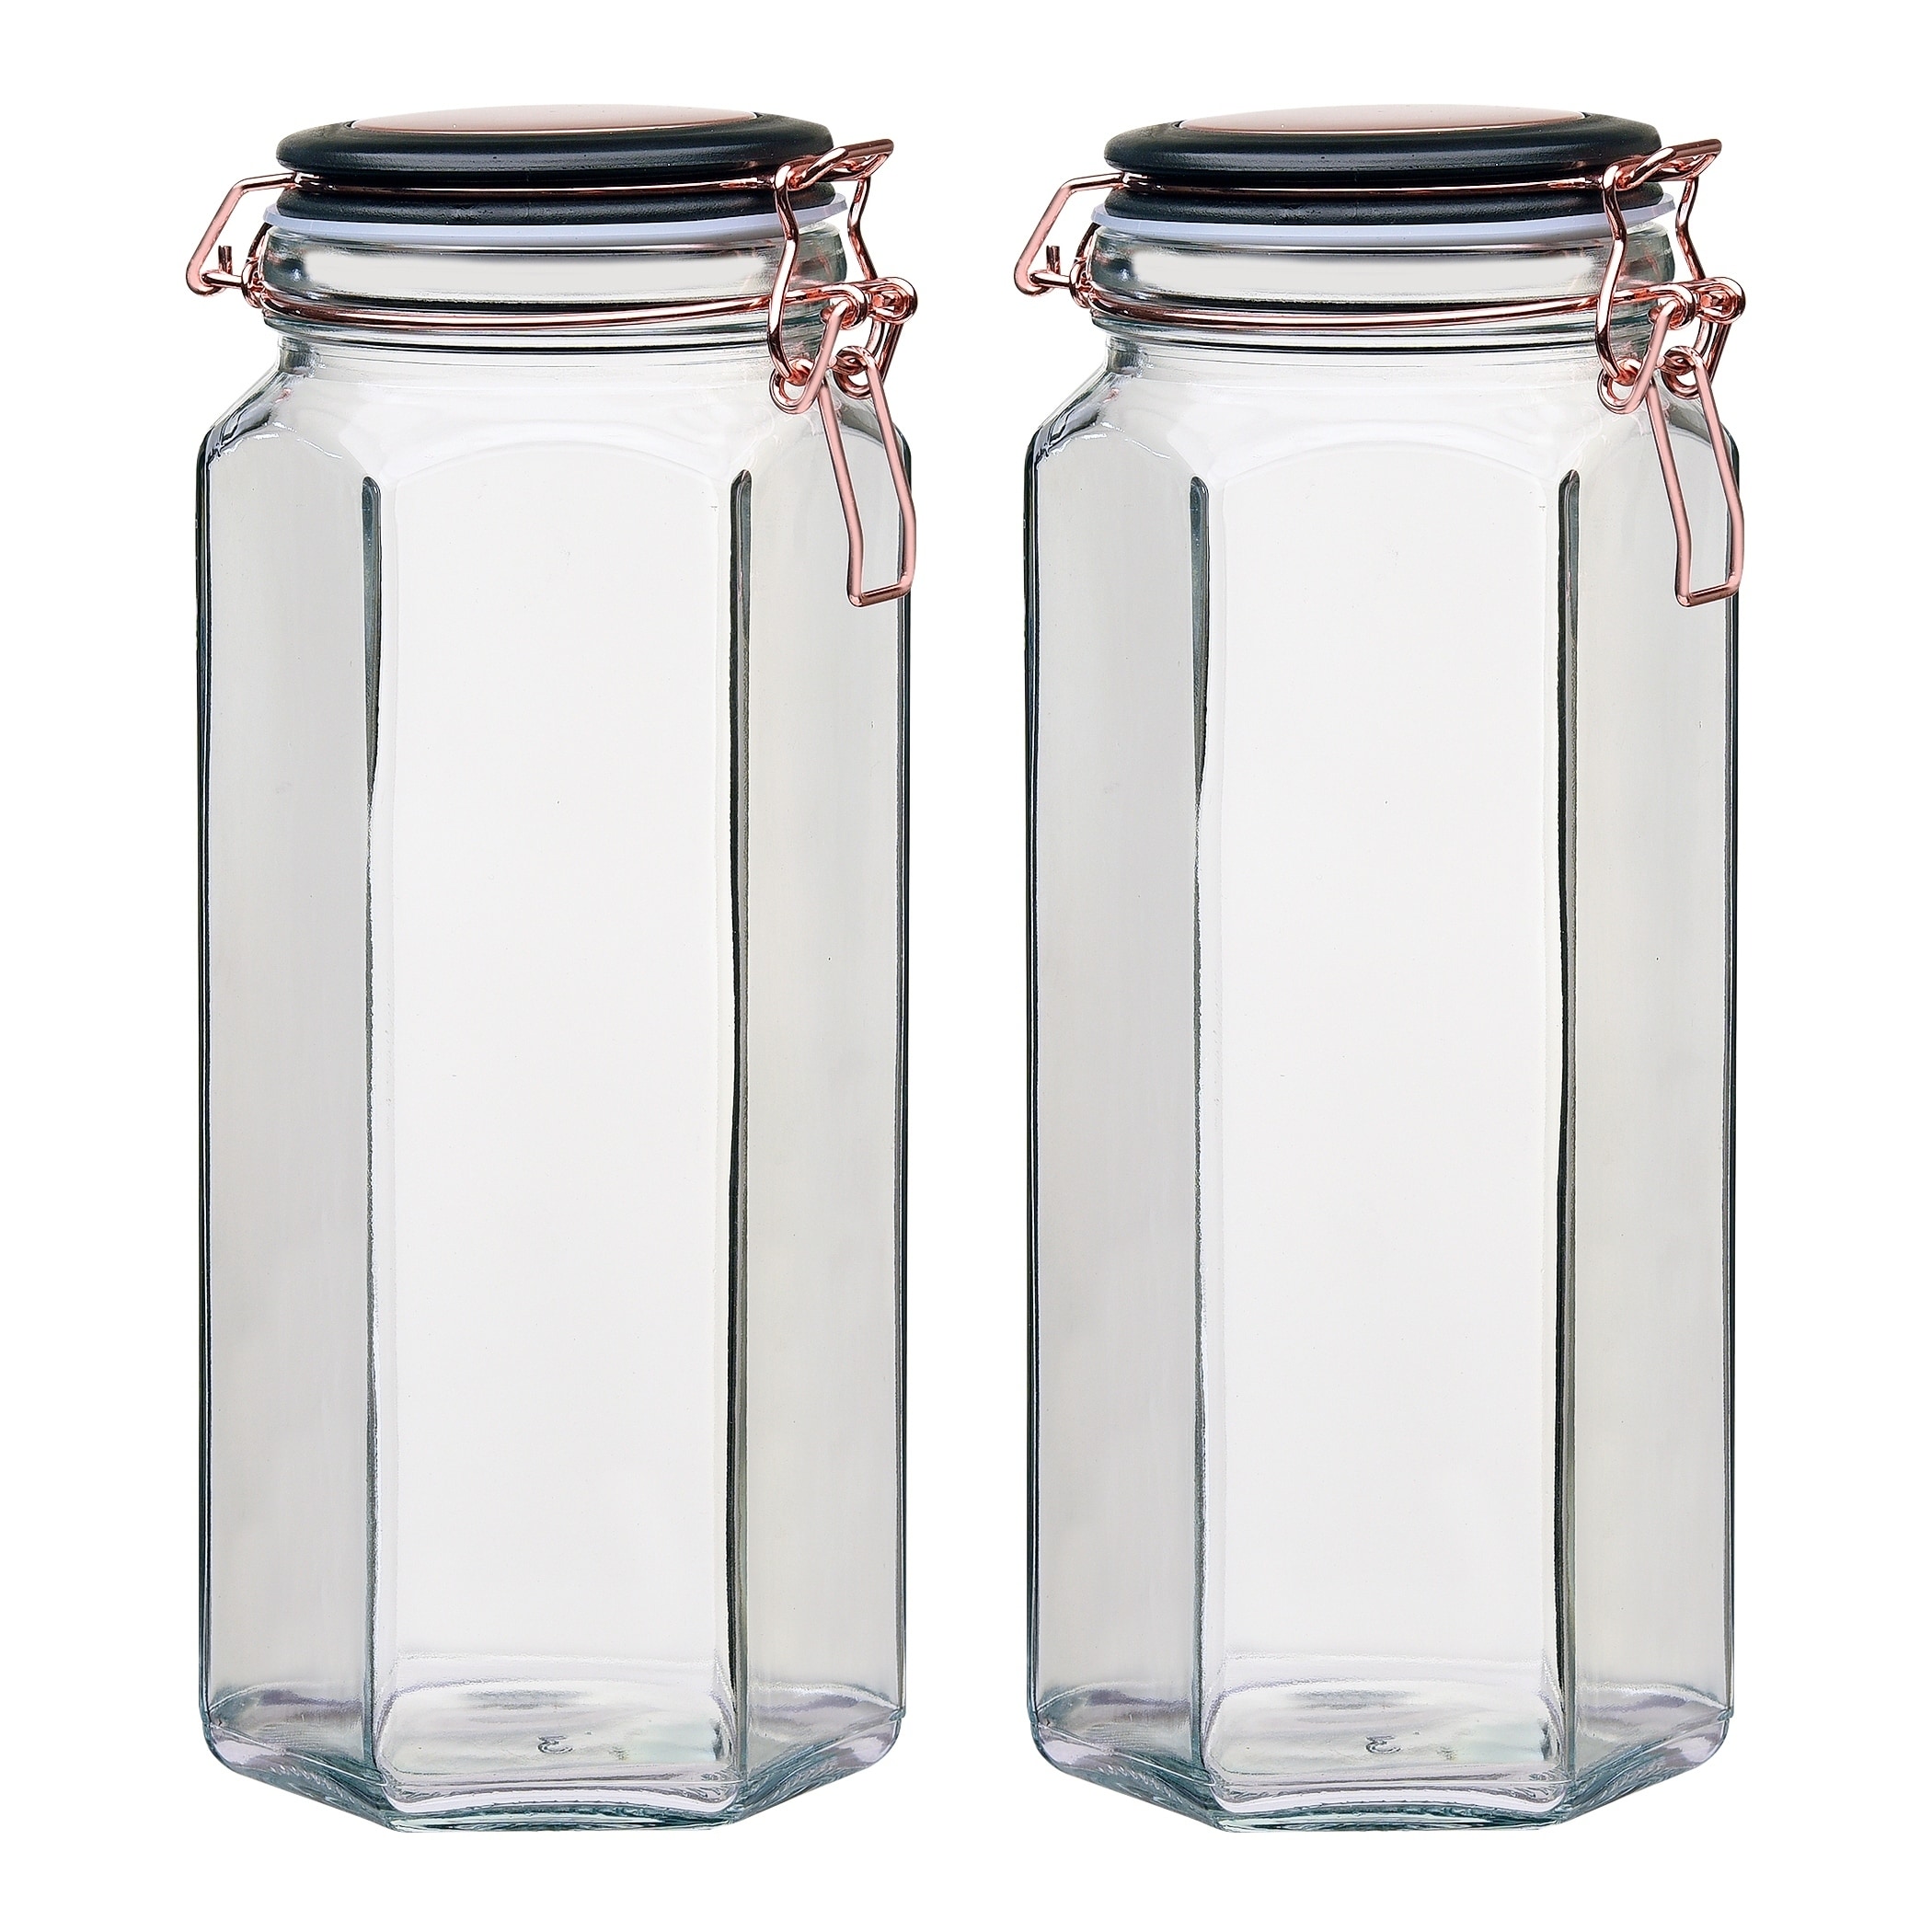 Home Basics 26 oz. Small Hexagon Glass Canister, Clear